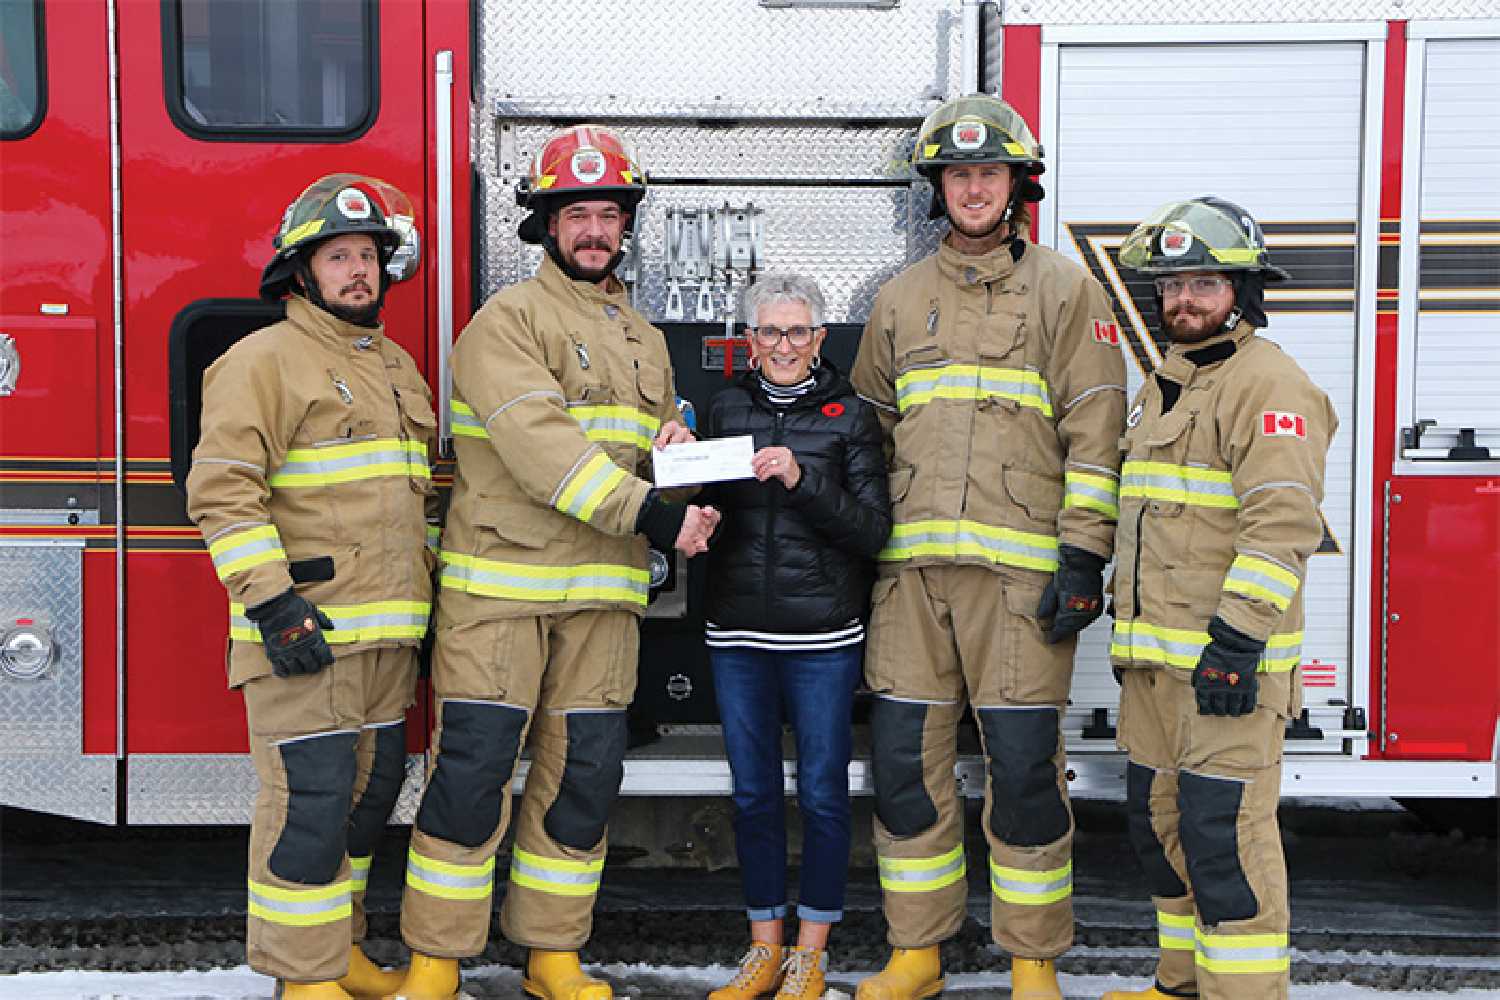 After winning $3,000 at the Nutrien Firefighter Rodeo, the Nutrien Rocanville Firefighter team decided to donate their winning prize to Crohn’s & Colitis Canada last Tuesday. From left to right are, Braden Brule and Jacob Porter of Nutrien Rocanville Firefighter Team, Nancy Apshkrum organizer for Crohn’s & Colitis Foundation in Moosomin, Andrew Daniel and Ace Brown of Nutrien Rocanville Firefighter Team. Missing: Jon Lucas.